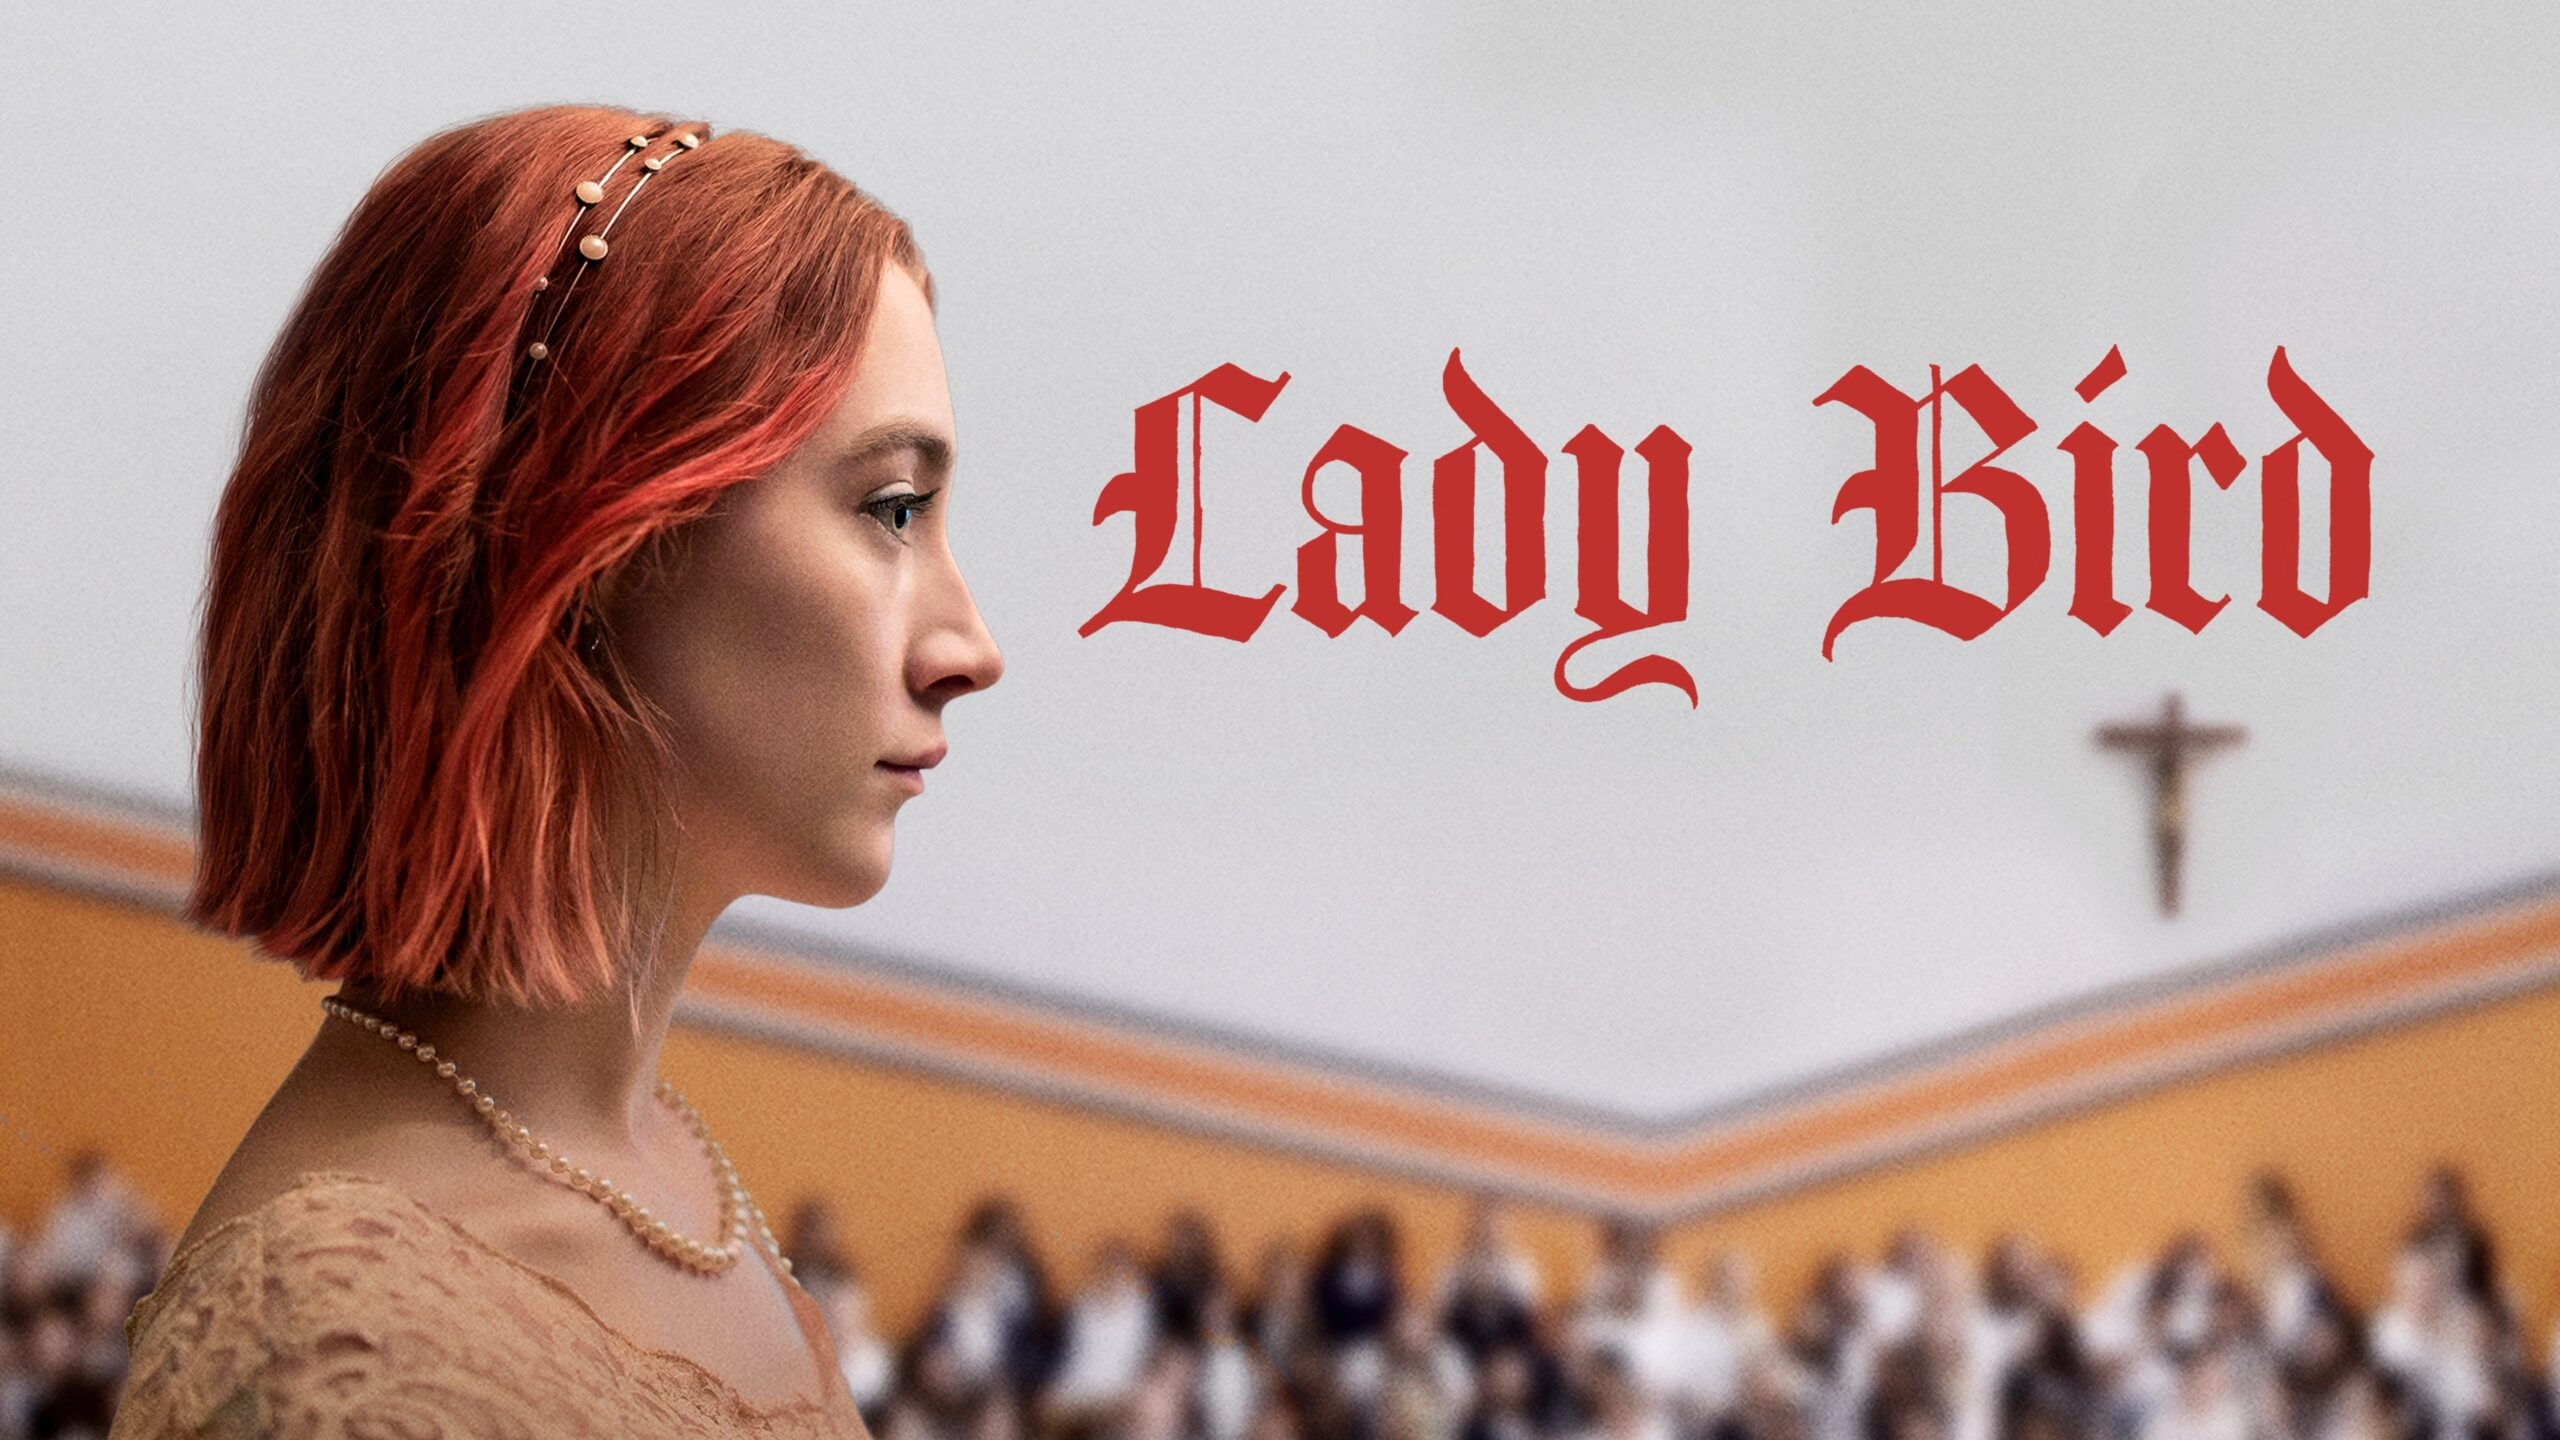 Lady Bird: Written and directed by Greta Gerwig in her solo directorial debut. 2560x1440 HD Wallpaper.